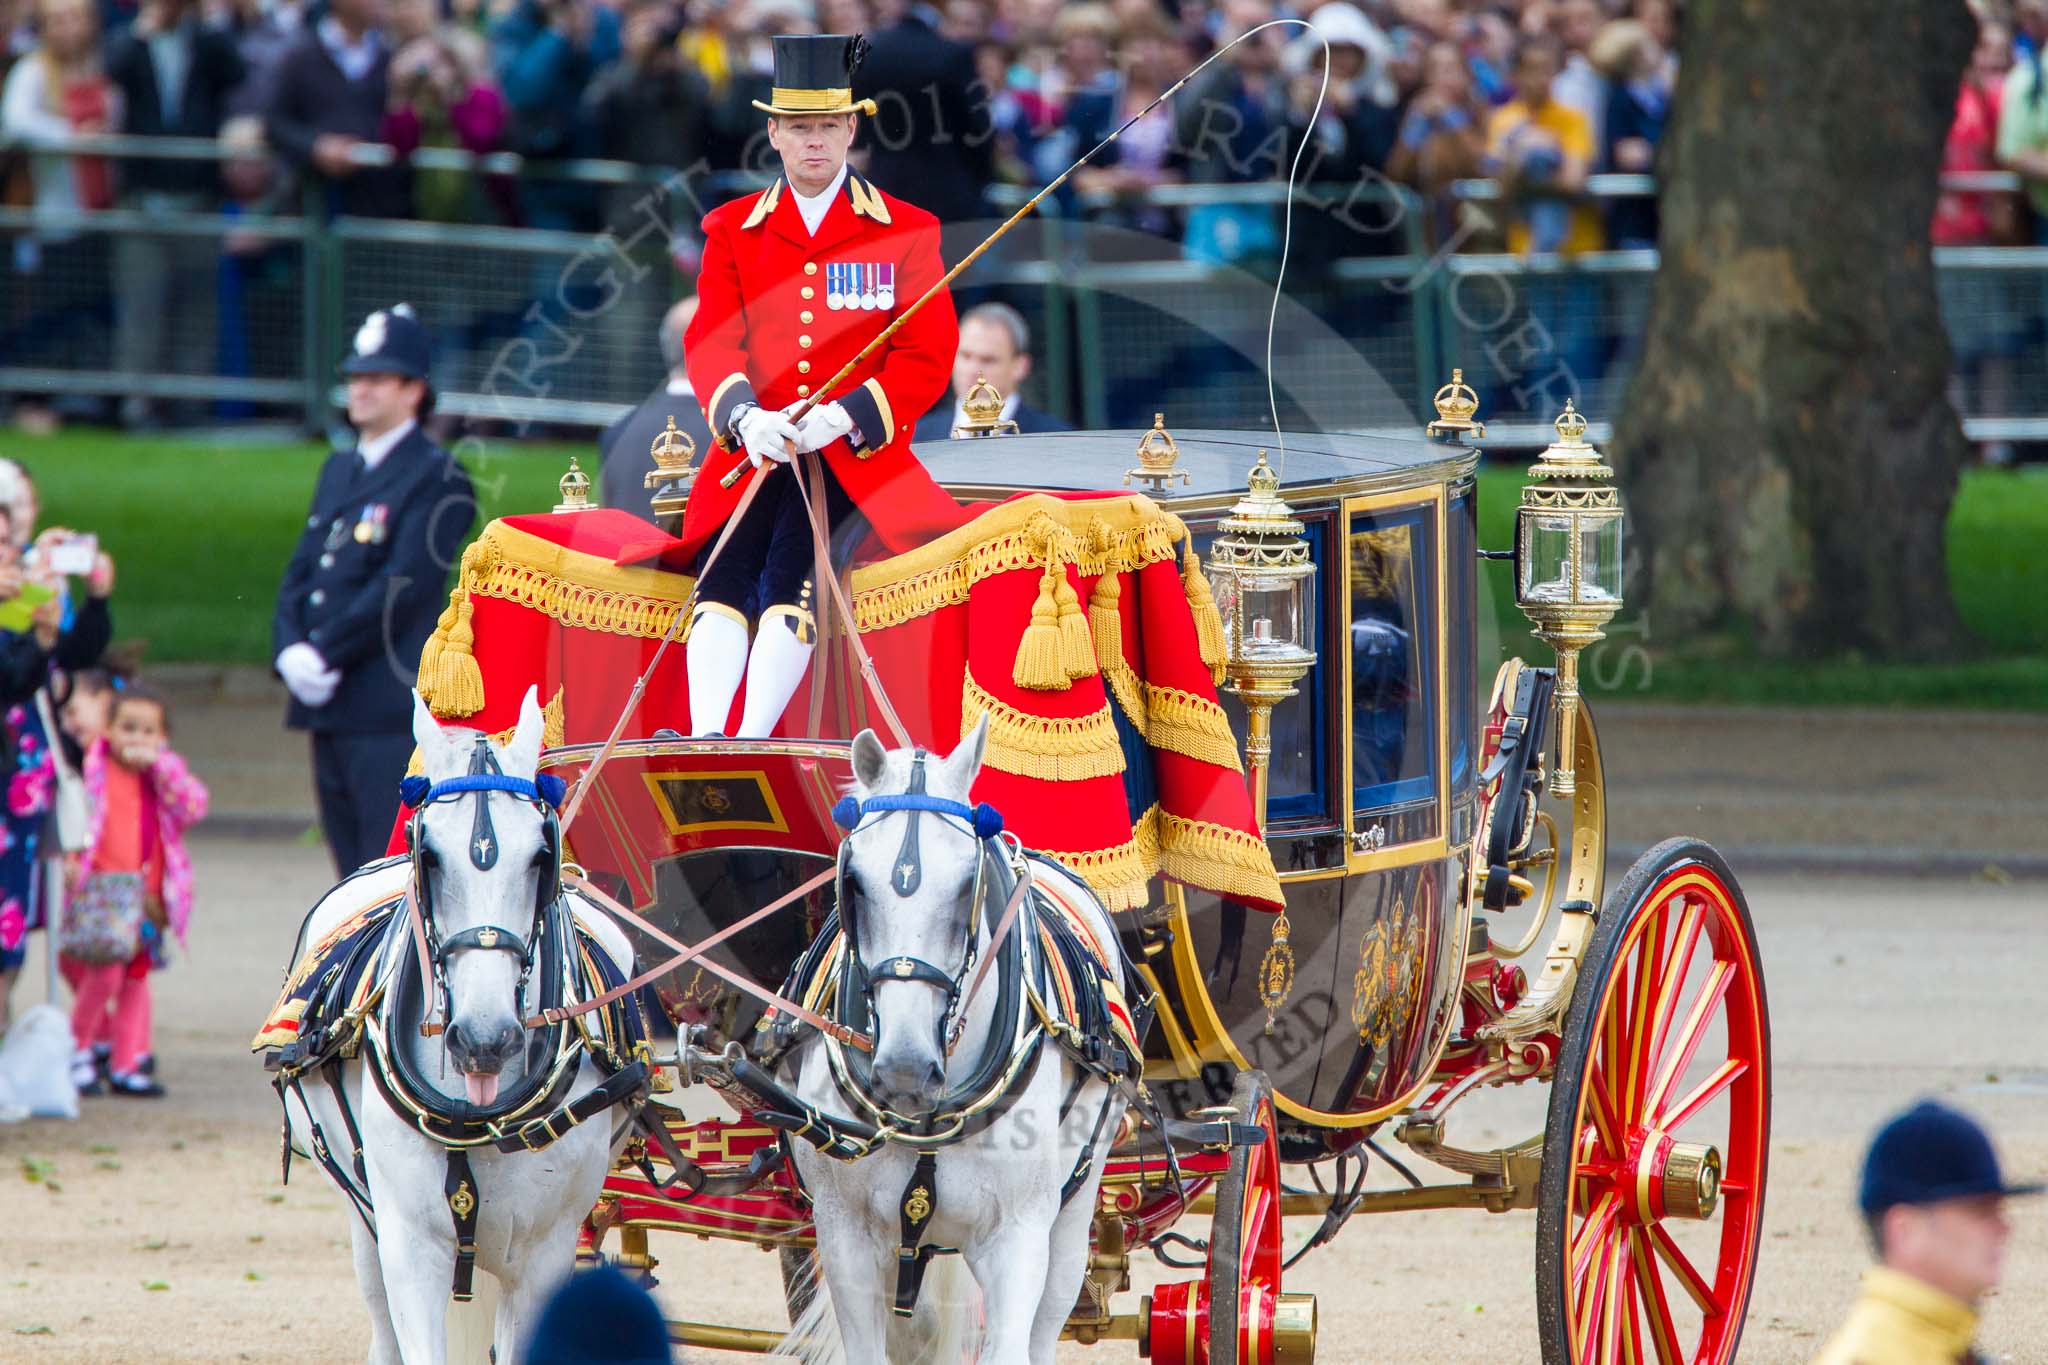 Trooping the Colour 2013: After the Inspection of the Line, the Glass Coach with HM The Queen turns back toward the dais for Her Majesty..
Horse Guards Parade, Westminster,
London SW1,

United Kingdom,
on 15 June 2013 at 11:06, image #355